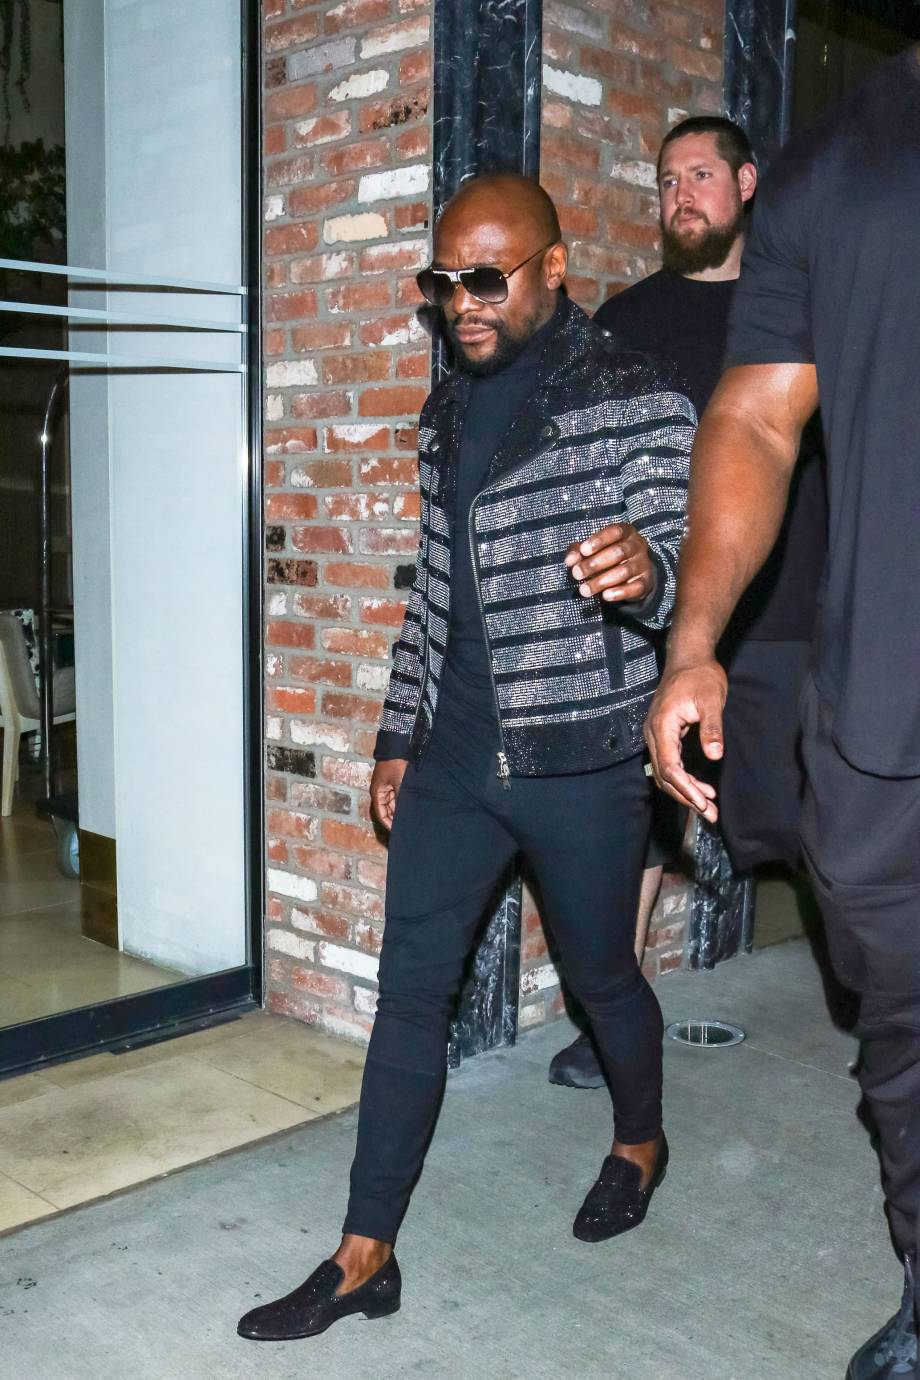 Floyd Mayweather Gives Fashion Goals While Appearing for NBA game